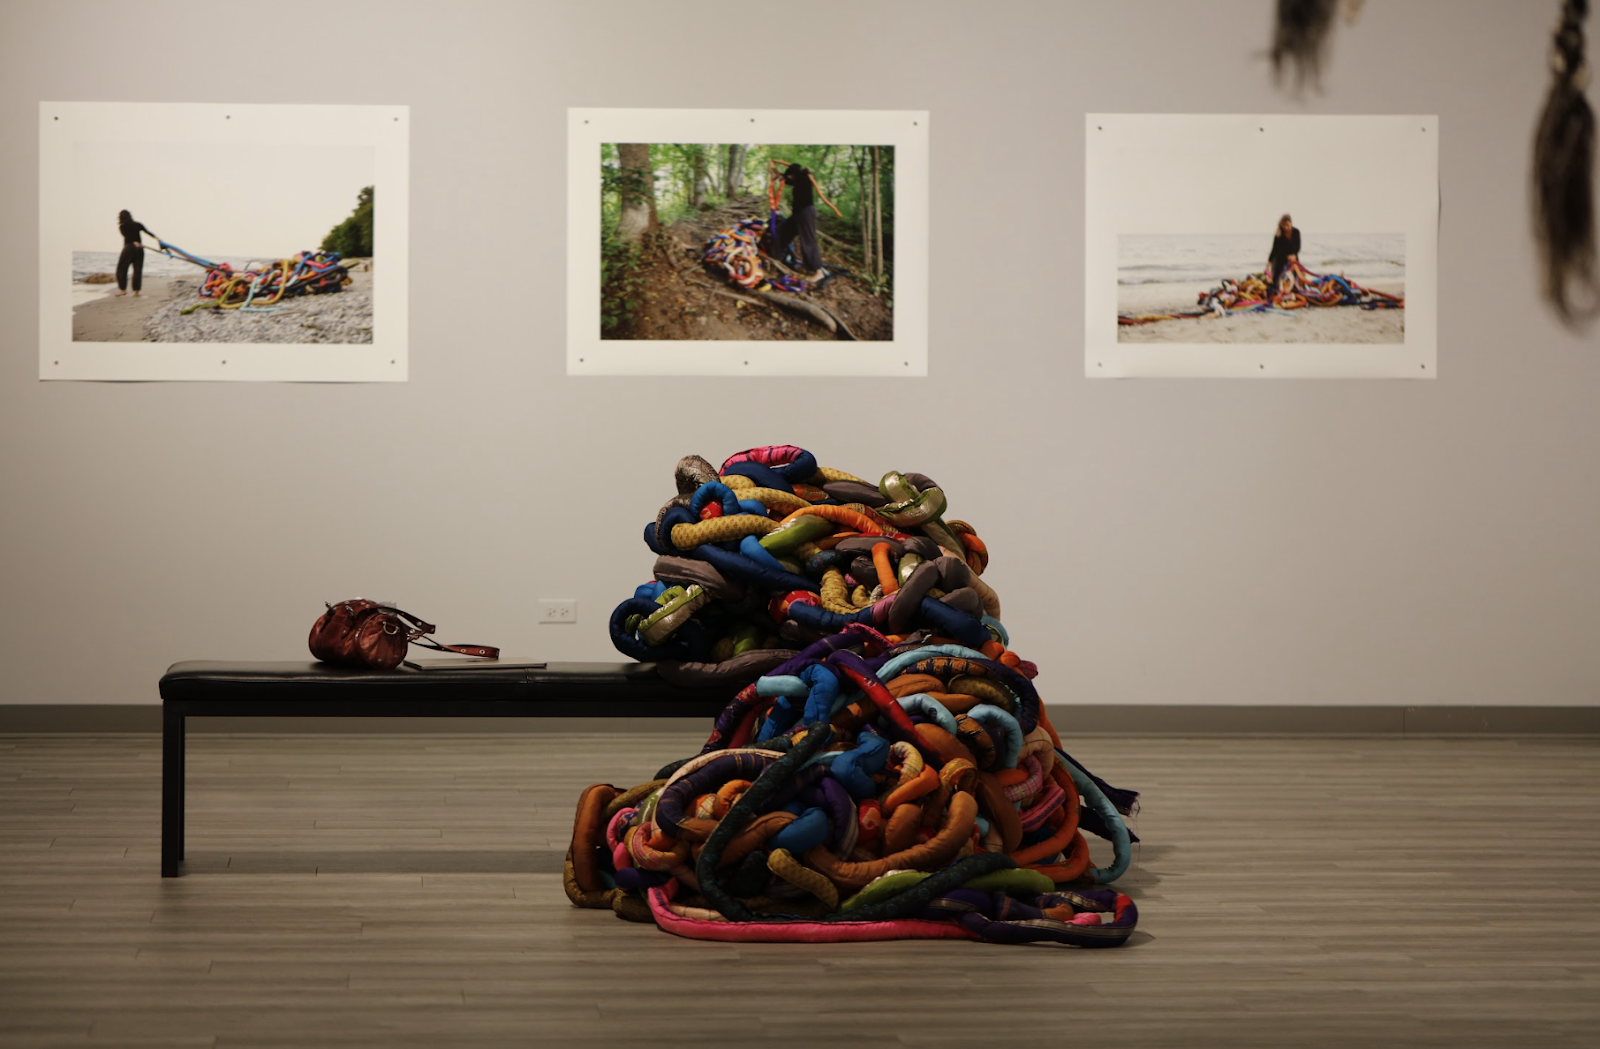 Image: Installation view, Entangled (2015). On the floor in the foreground, is a bench with a small leather bag on it. Further to the right of the bag are many multi-colored, thick tubes of fabric, tangled and knotted thickly around each other. The Weight of Our Past (2021), photographs, hung on the wall behind it. Image courtesy of the South Asia Institute.